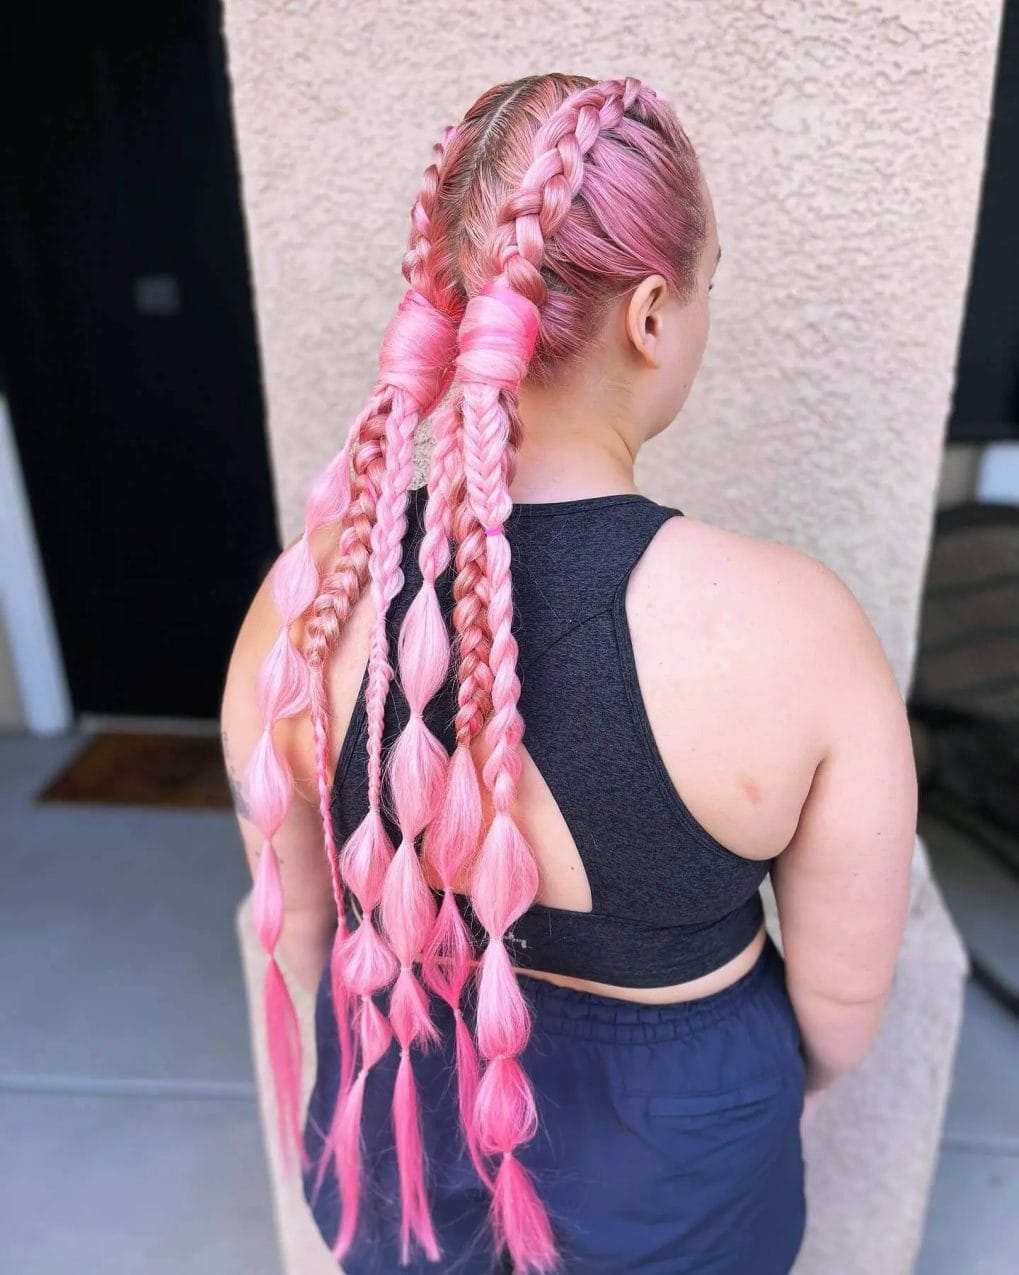 Bright pink thick braids starting from neat cornrows with fluffy ends